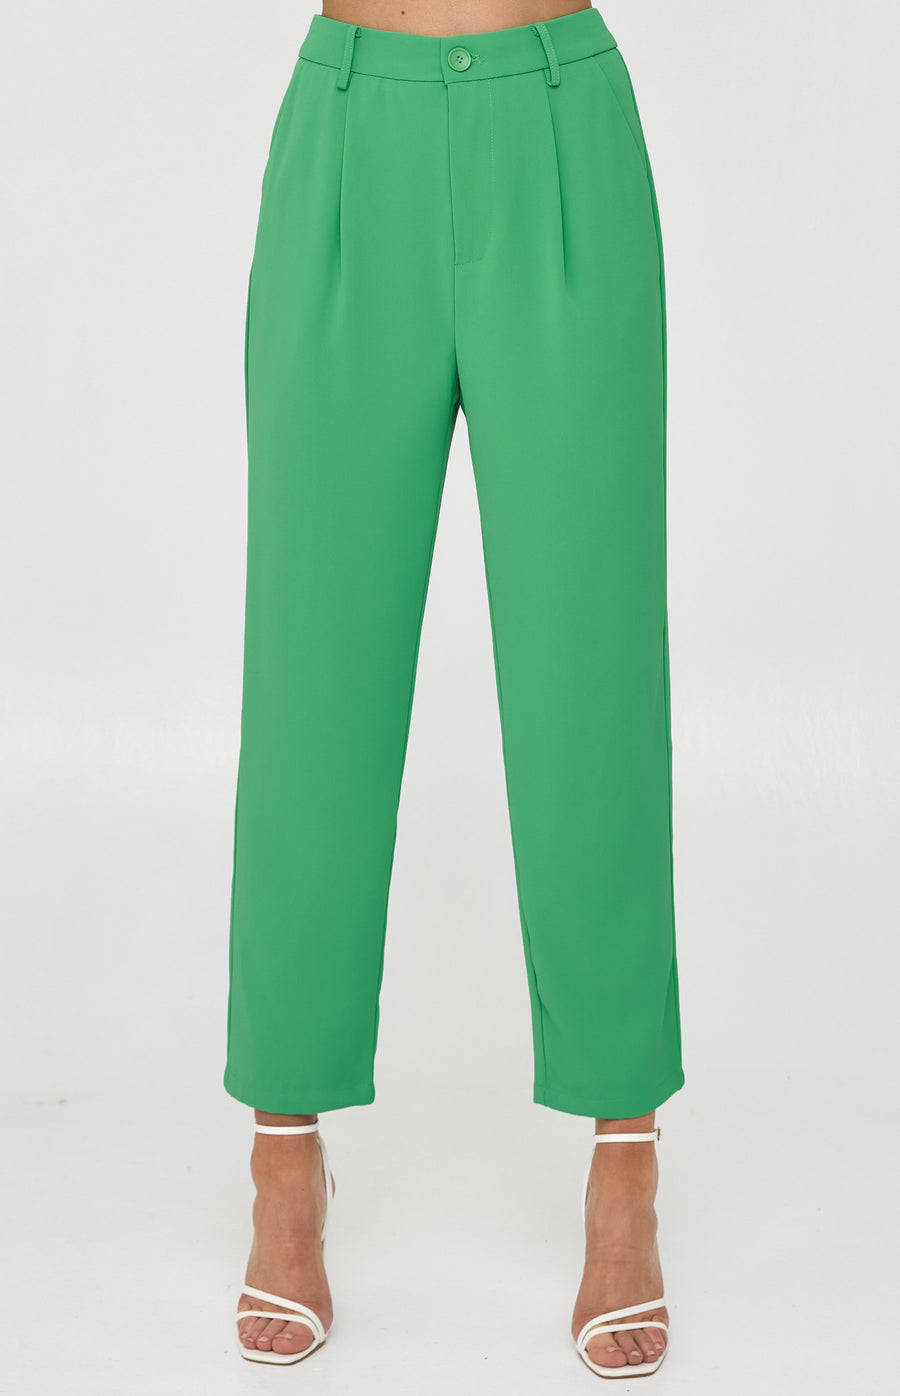 W&C - High Wasted Tapered Pant in Green